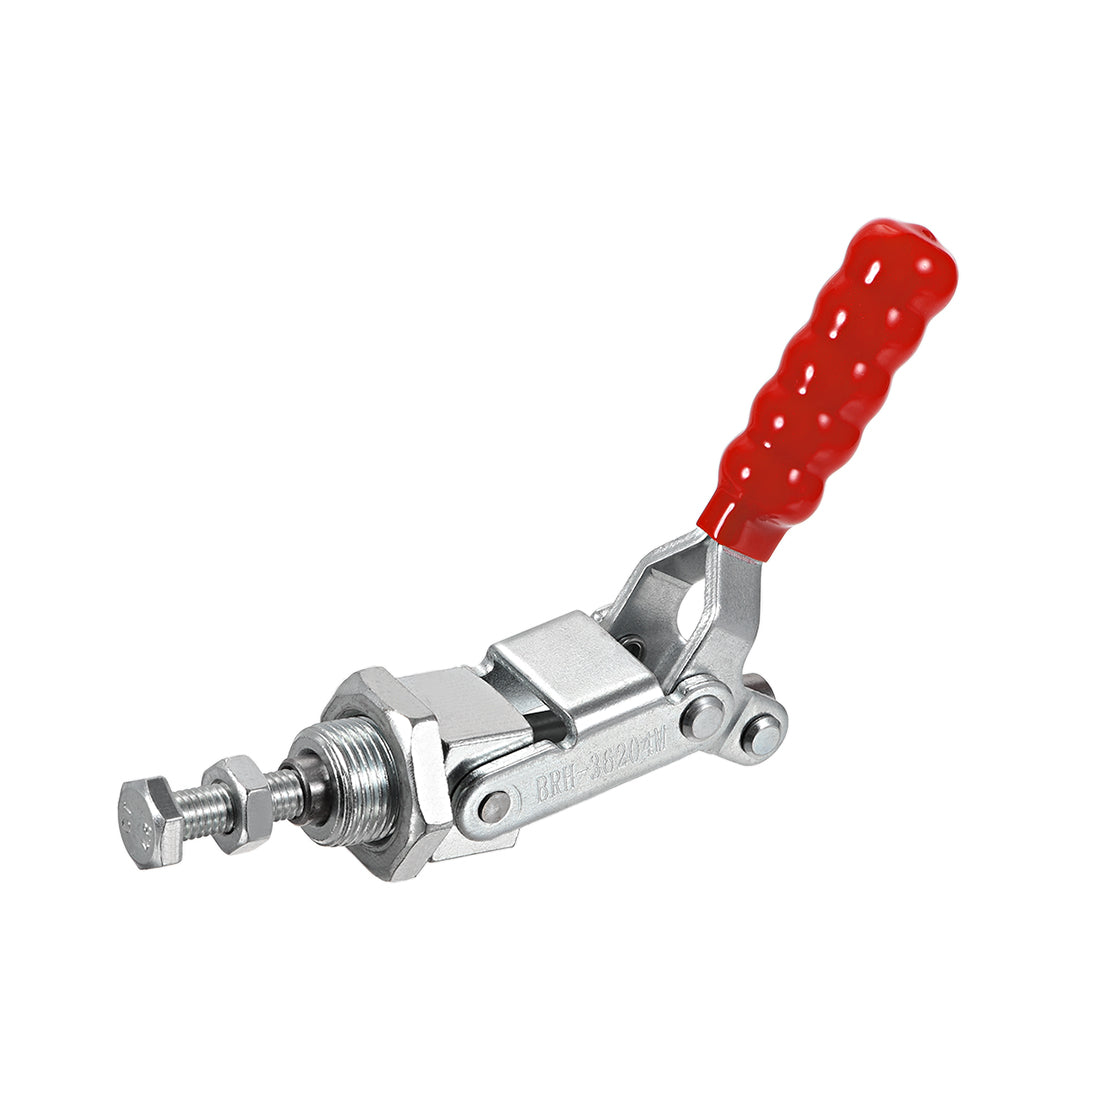 uxcell Uxcell Hand Tool Pull Push Action Toggle Clamp Quick Release Clamp 300 lbs/136kg Holding Capacity 39mm Stroke